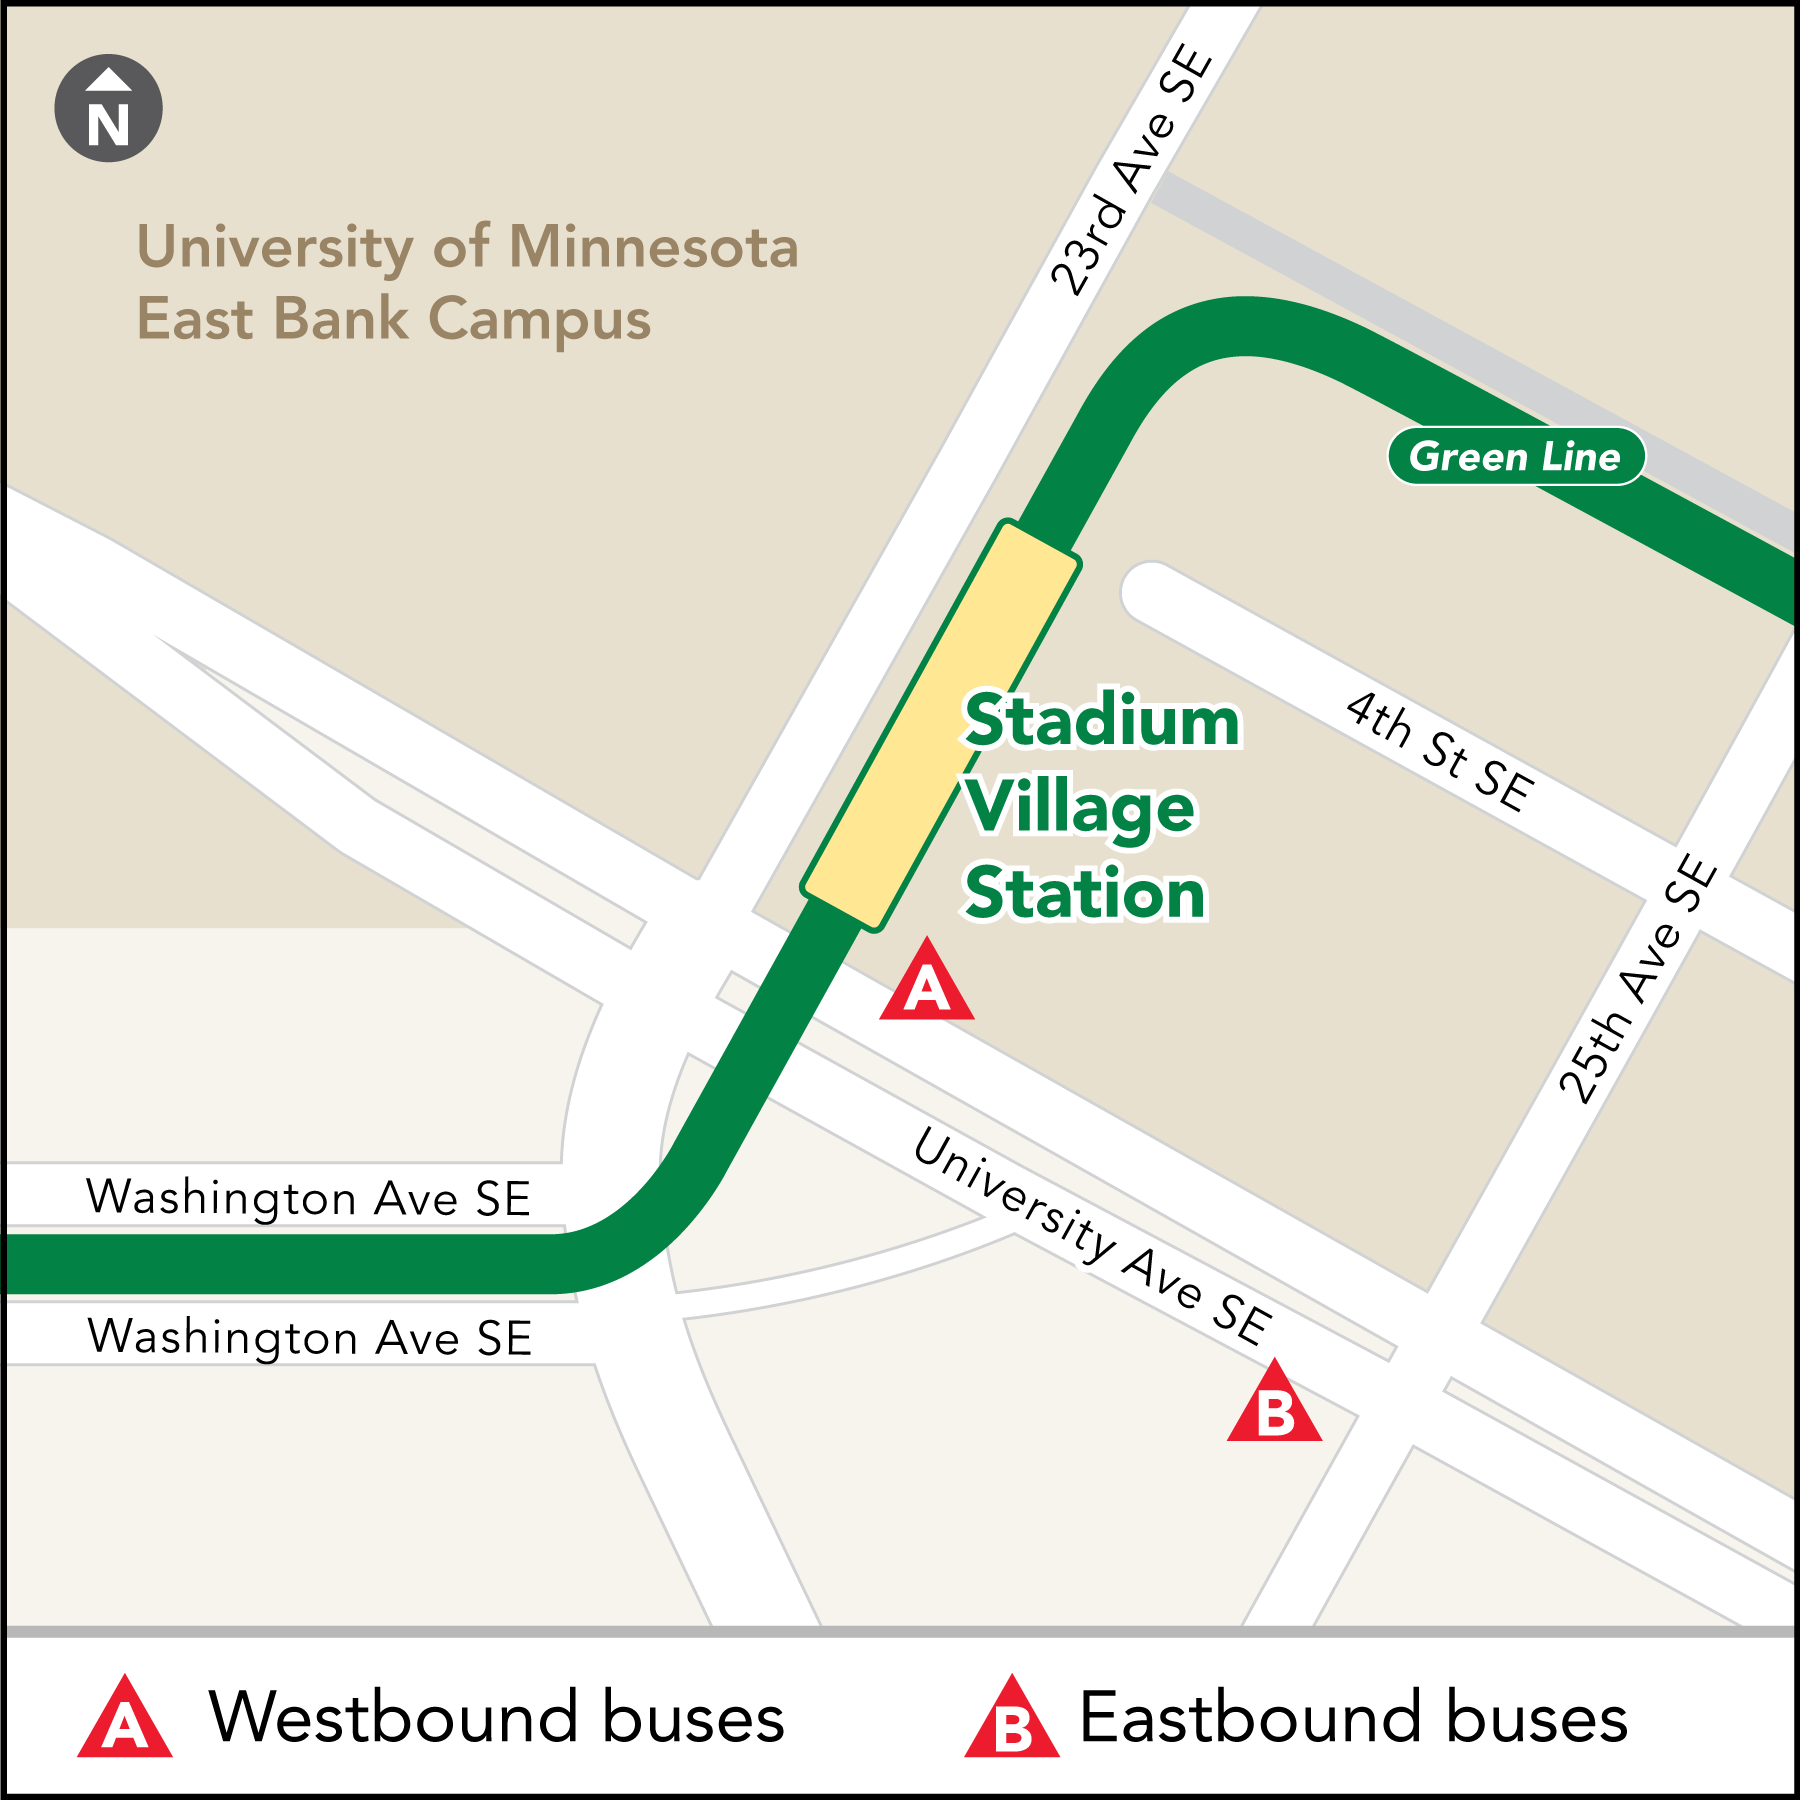 Board buses to Target Field on westbound University Ave SE at 23rd Ave SE. Board buses to Union Depot on eastbound University Ave SE at 25th Ave SE.